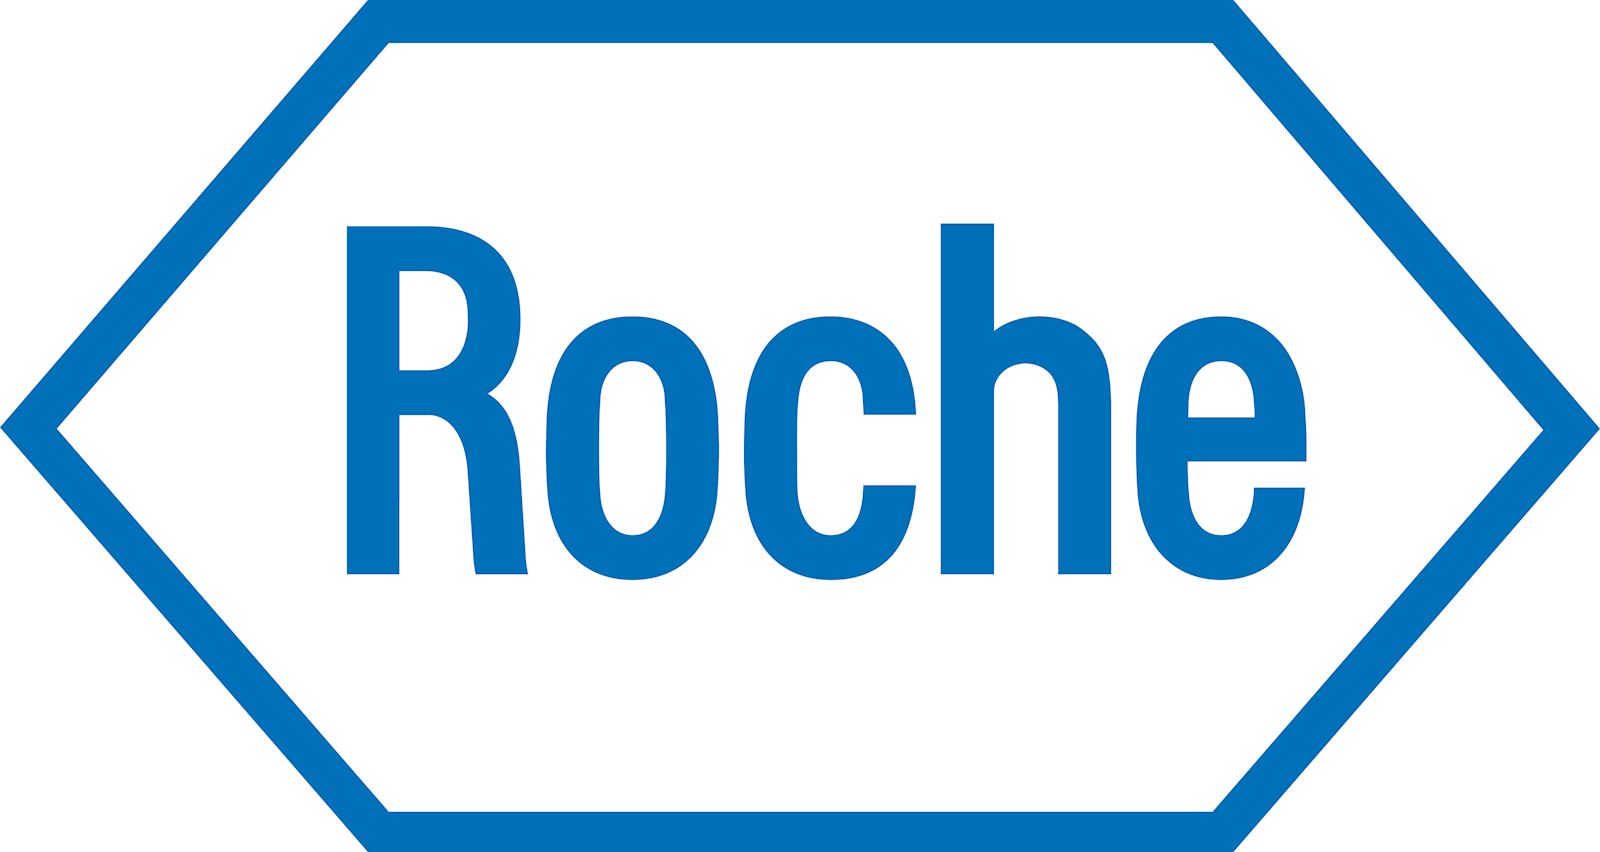 https://custombiotech.roche.com/home/featured-solutions/cell-and-gene-therapy.html%20